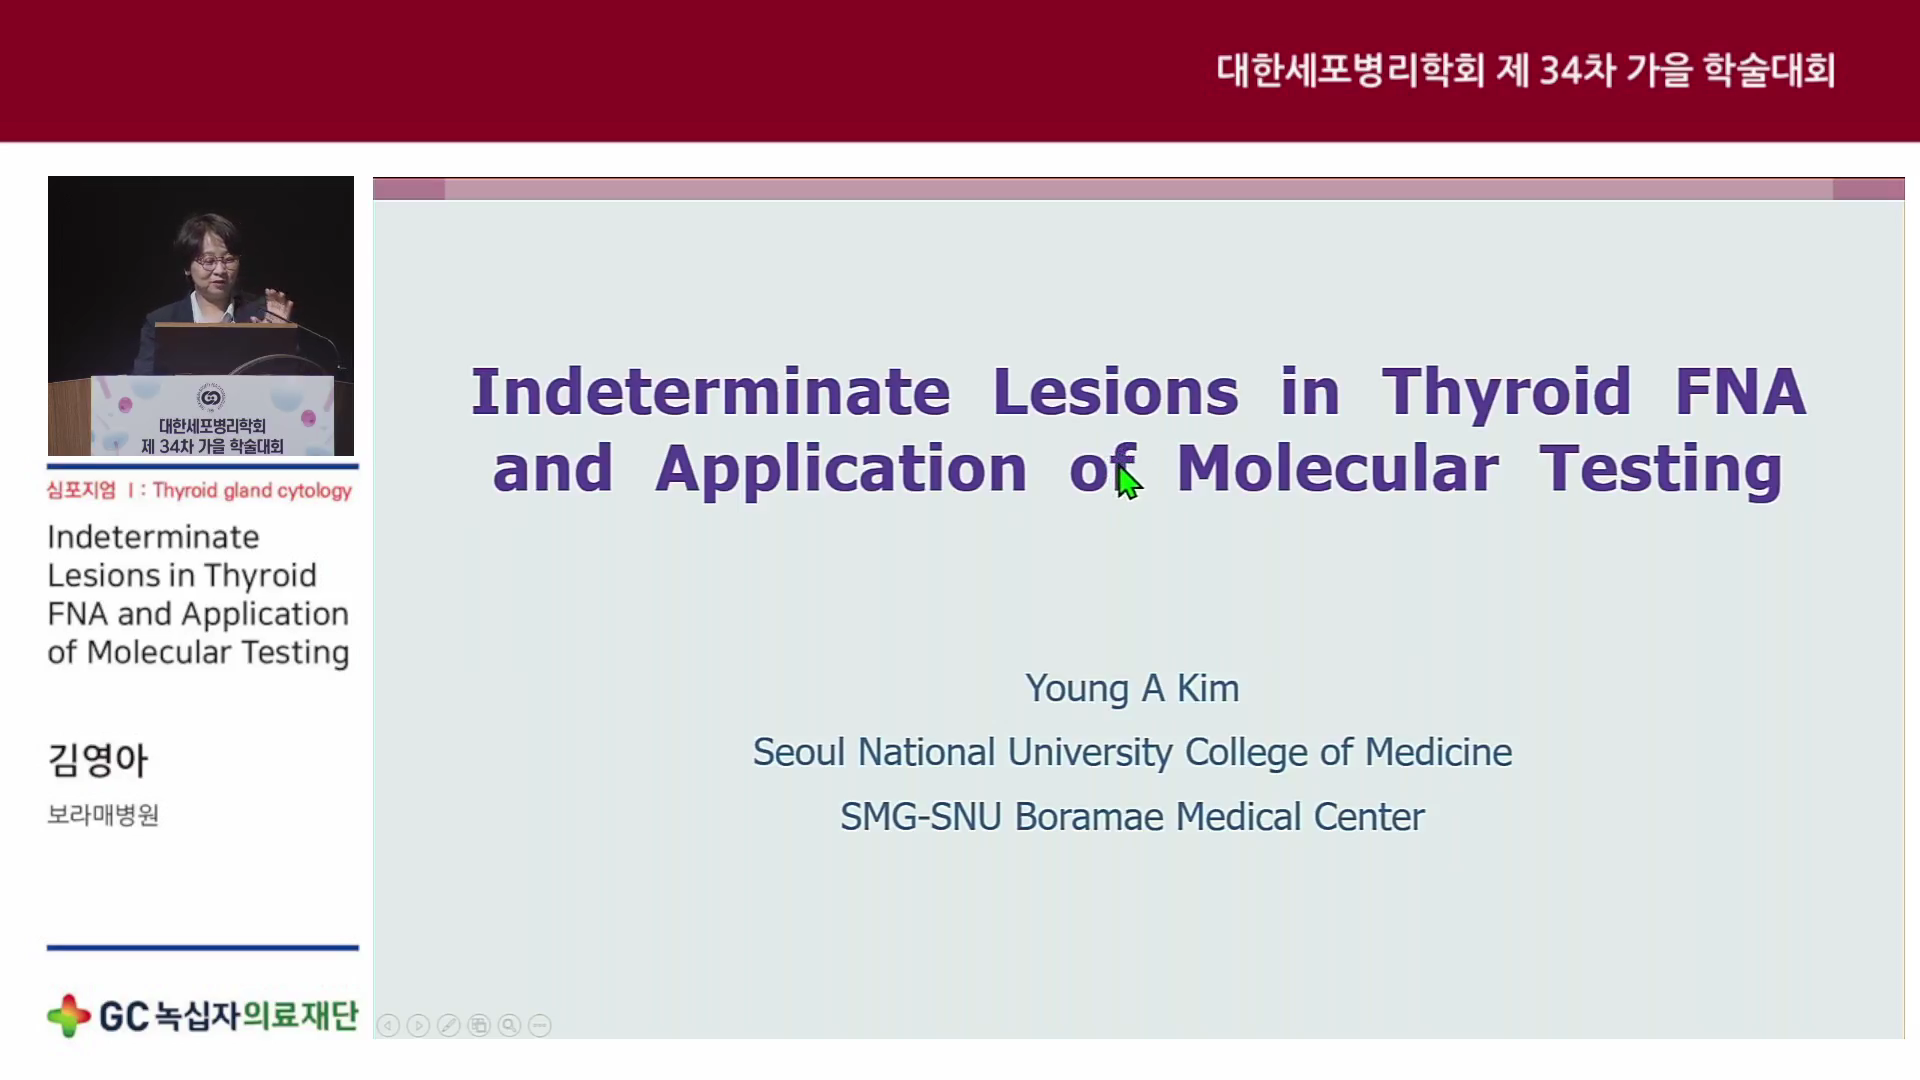 Indeterminate Lesions in Thyroid FNA and Application of Molecular Testing